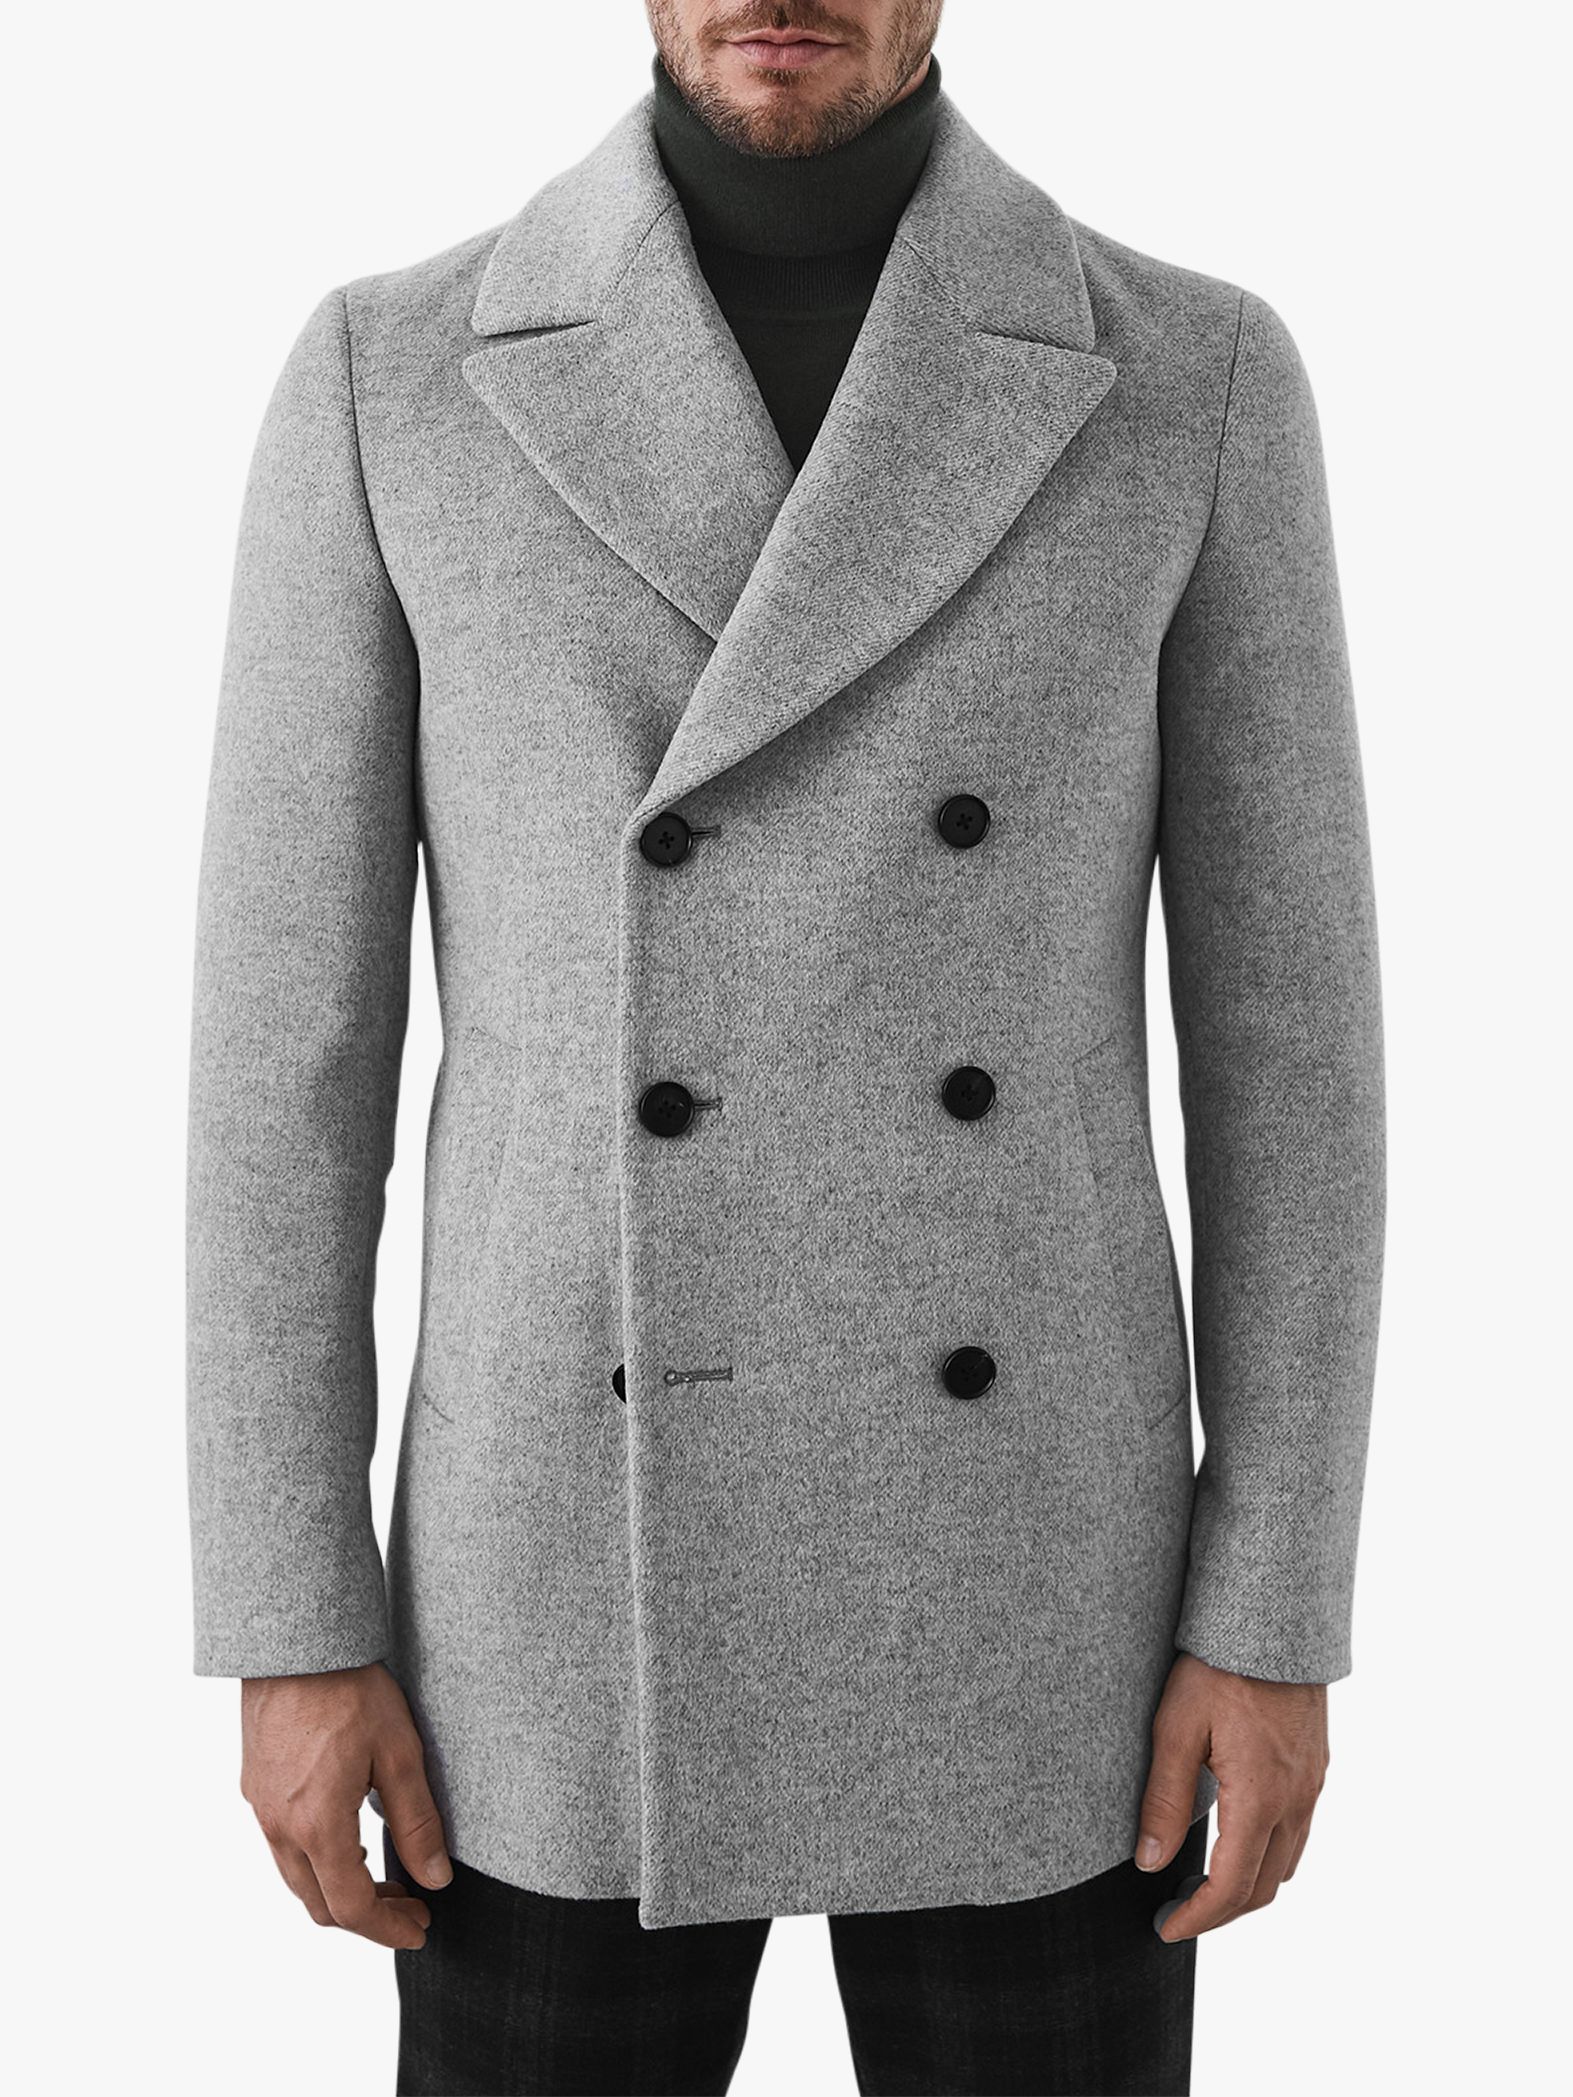 Reiss Bogart Double Breasted Overcoat, Grey at John Lewis & Partners